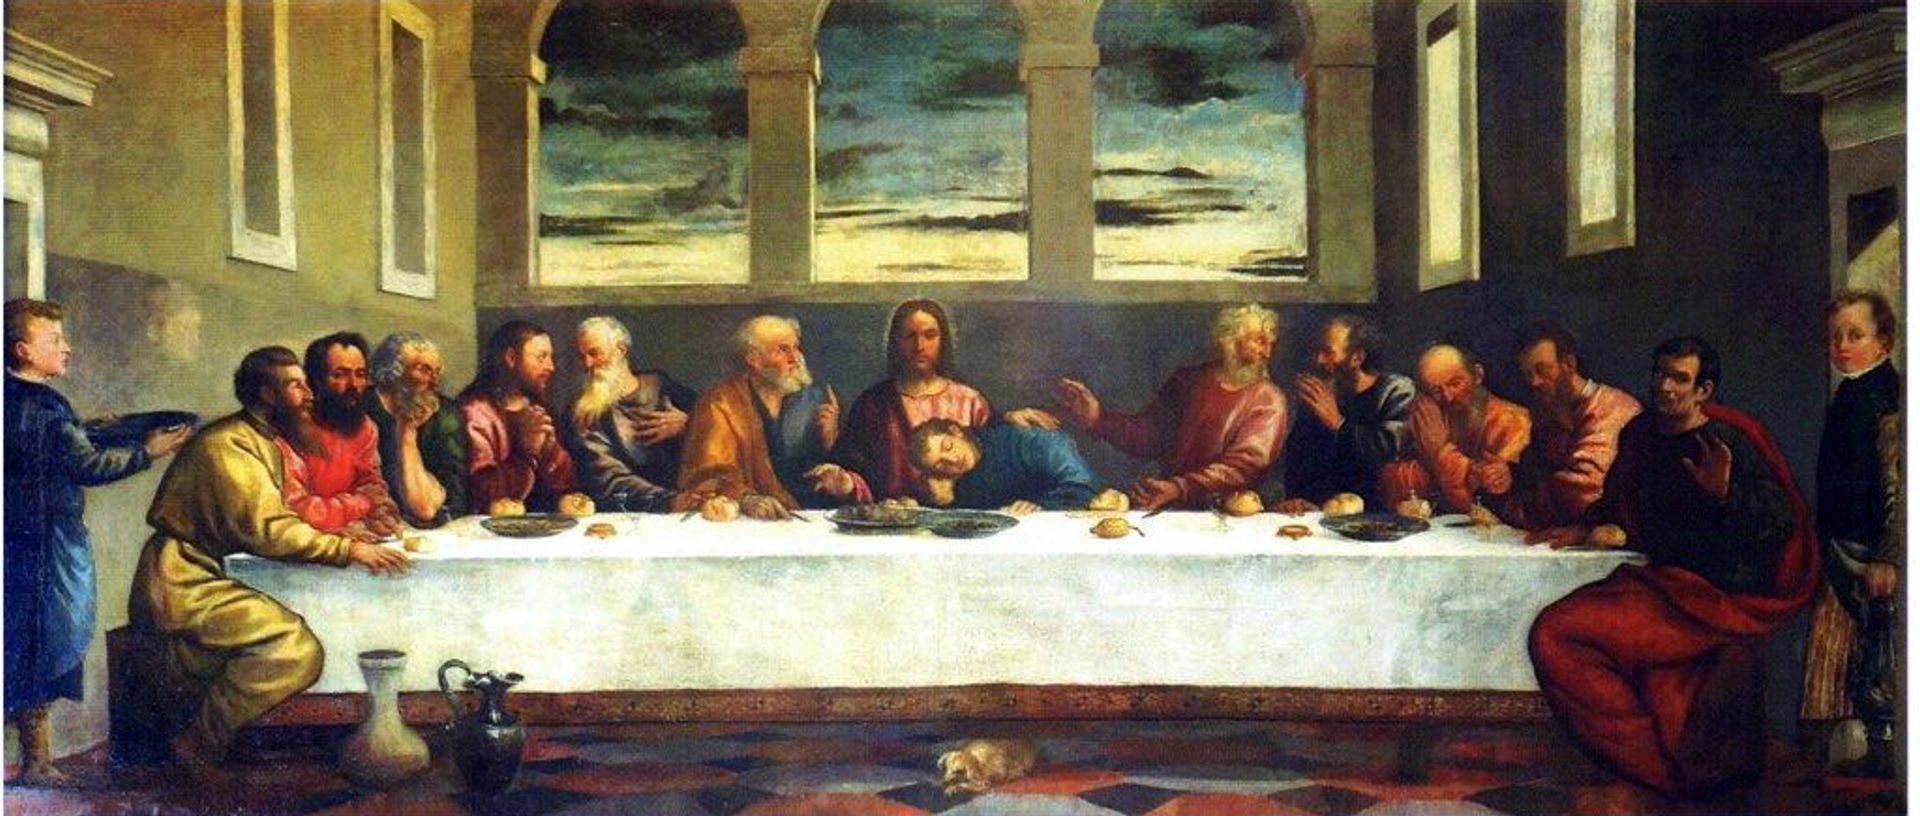 The Last Supper painting, thought to be by Titian Courtesy of St Michael and All Angels, Ledbury Parish Church